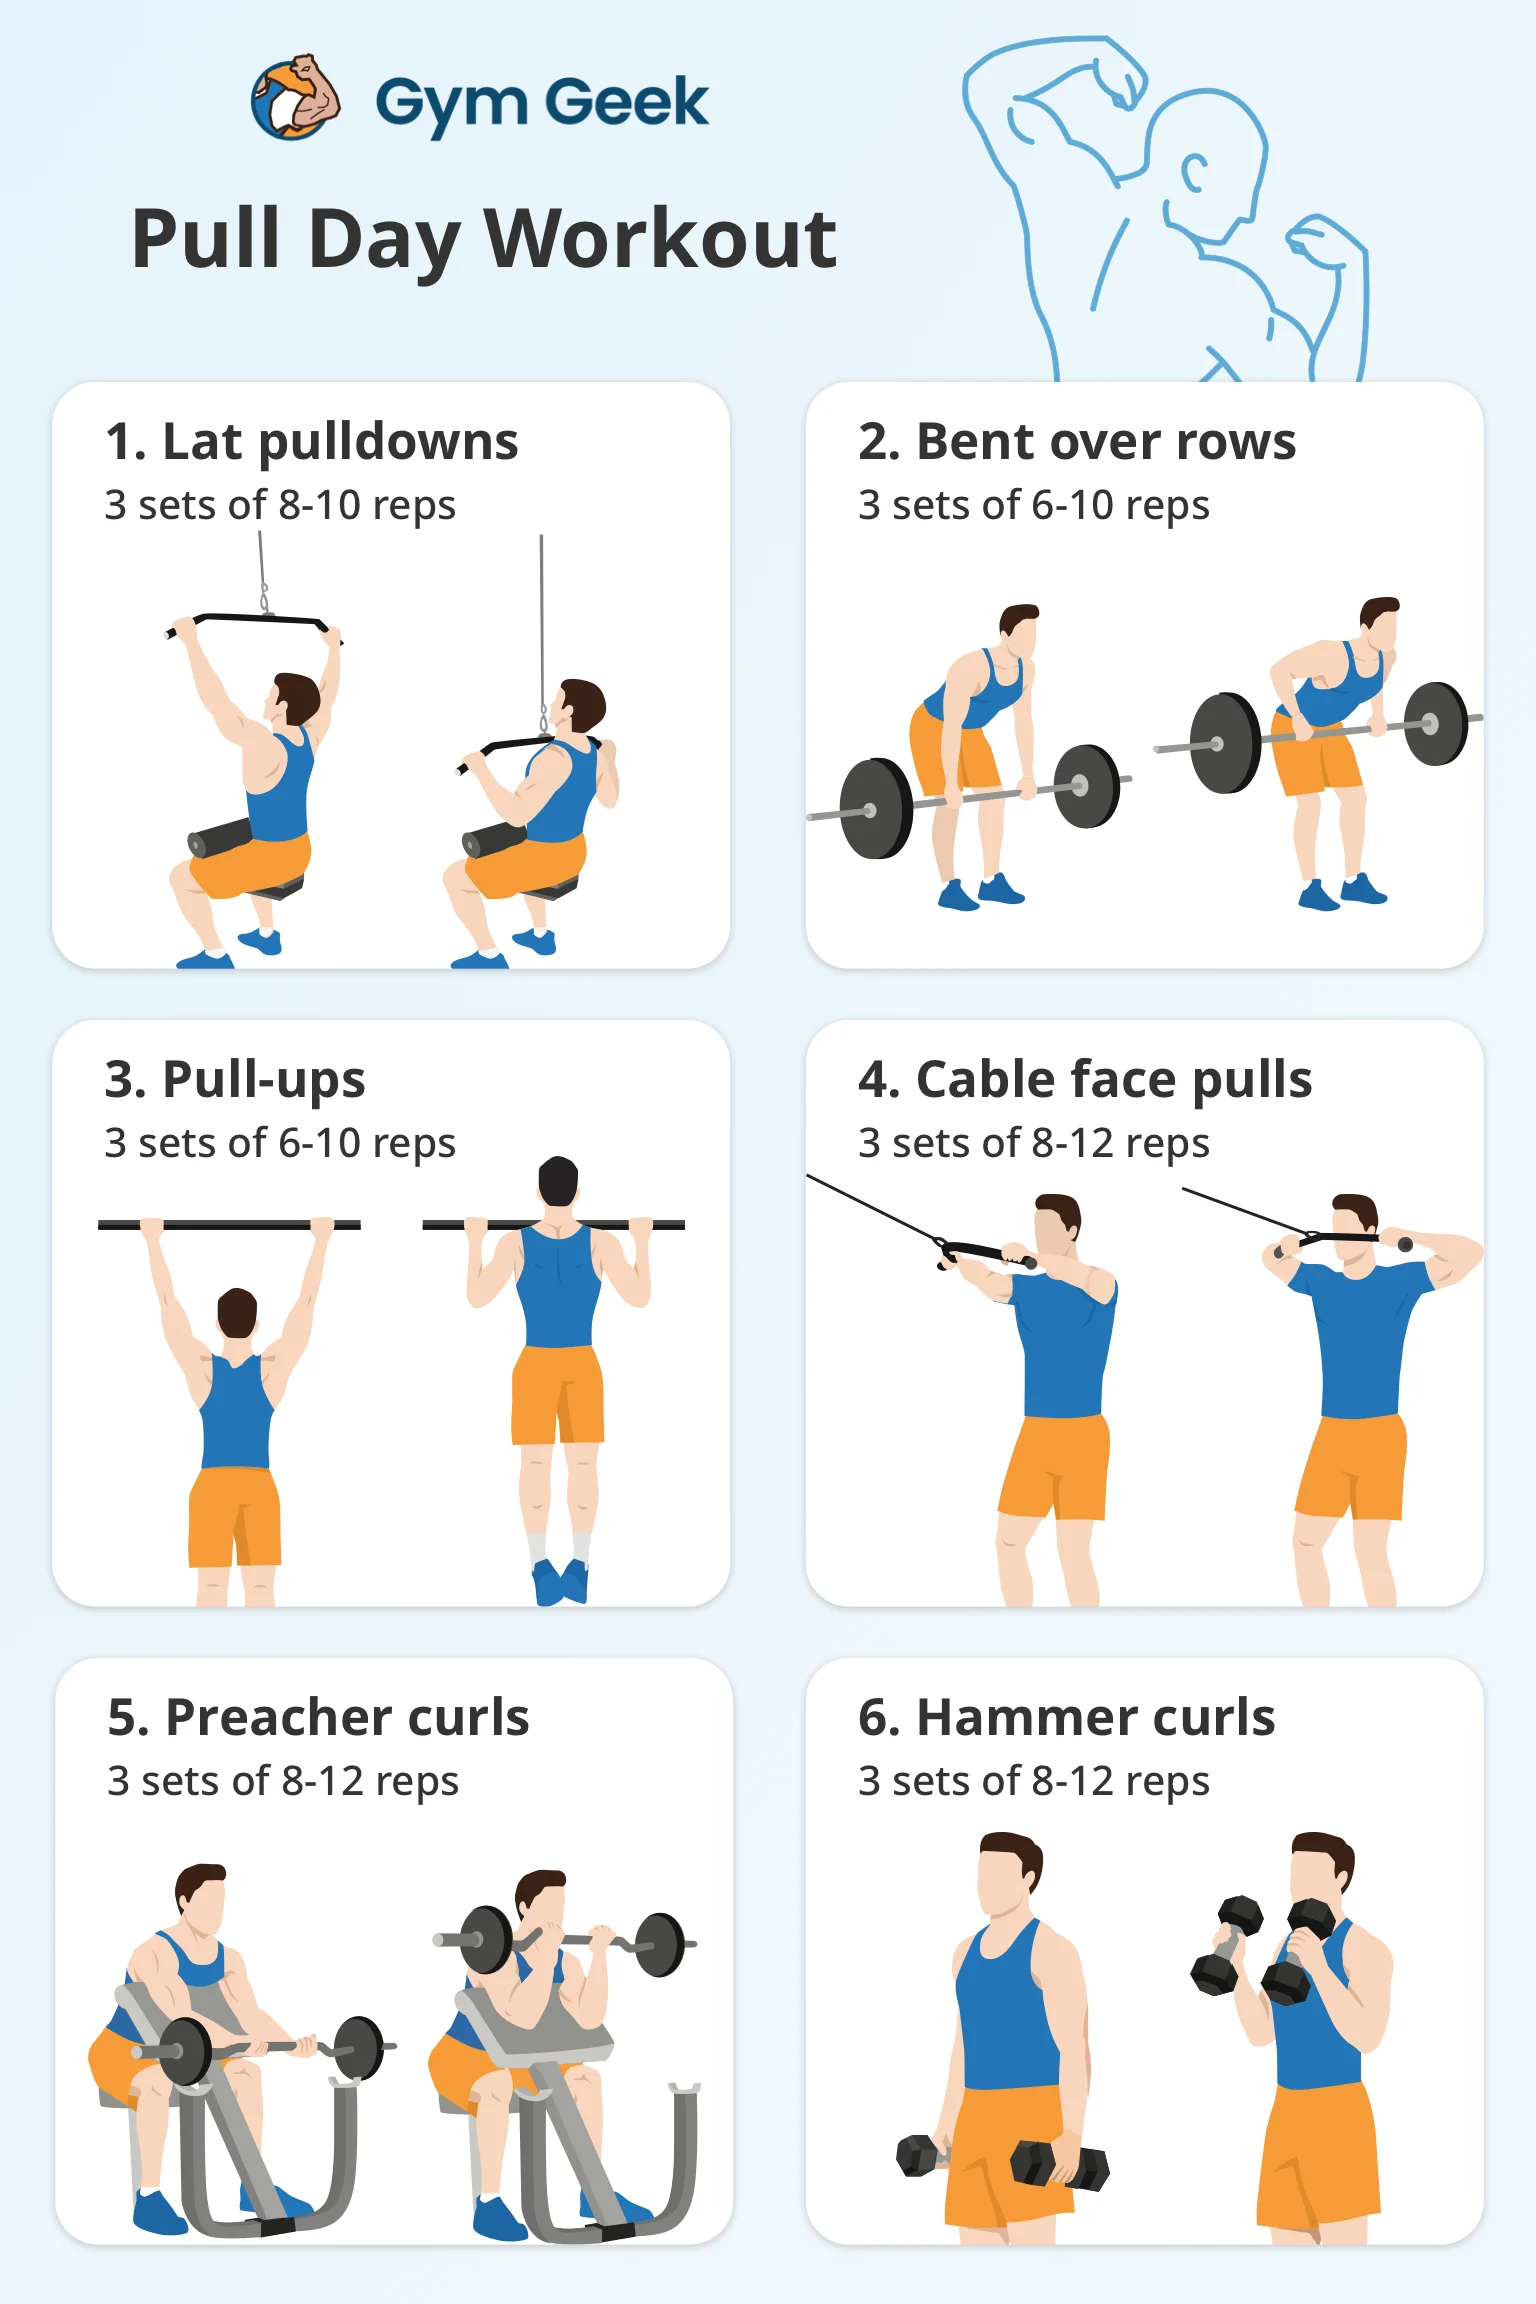 infographic - Breakdown of the pull day workout, featuring 6 exercises.